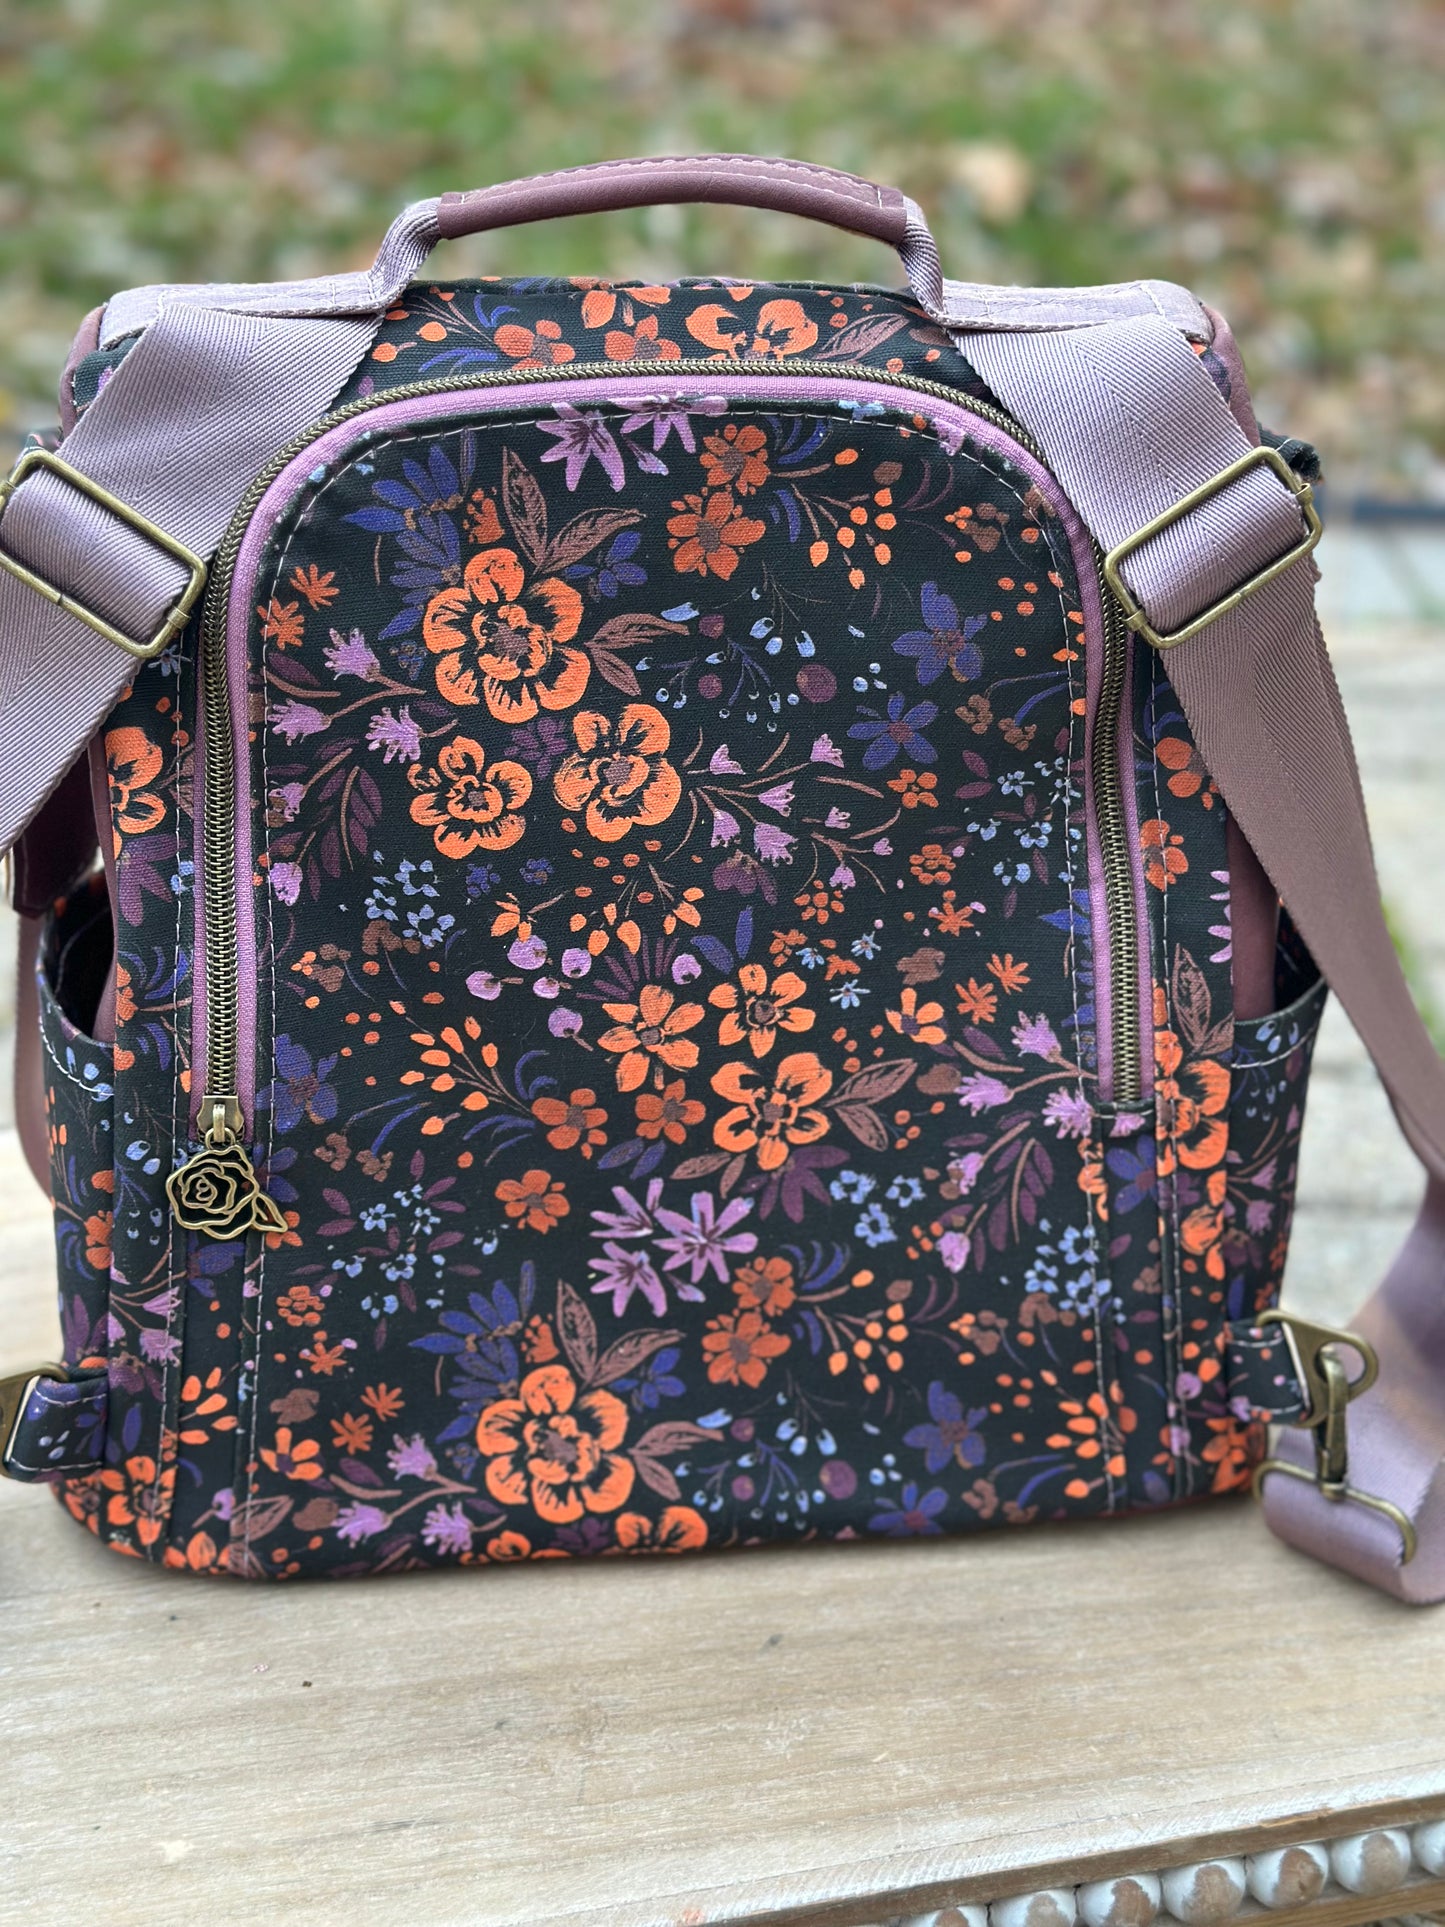 Dark Floral Anti-Theft Backpack